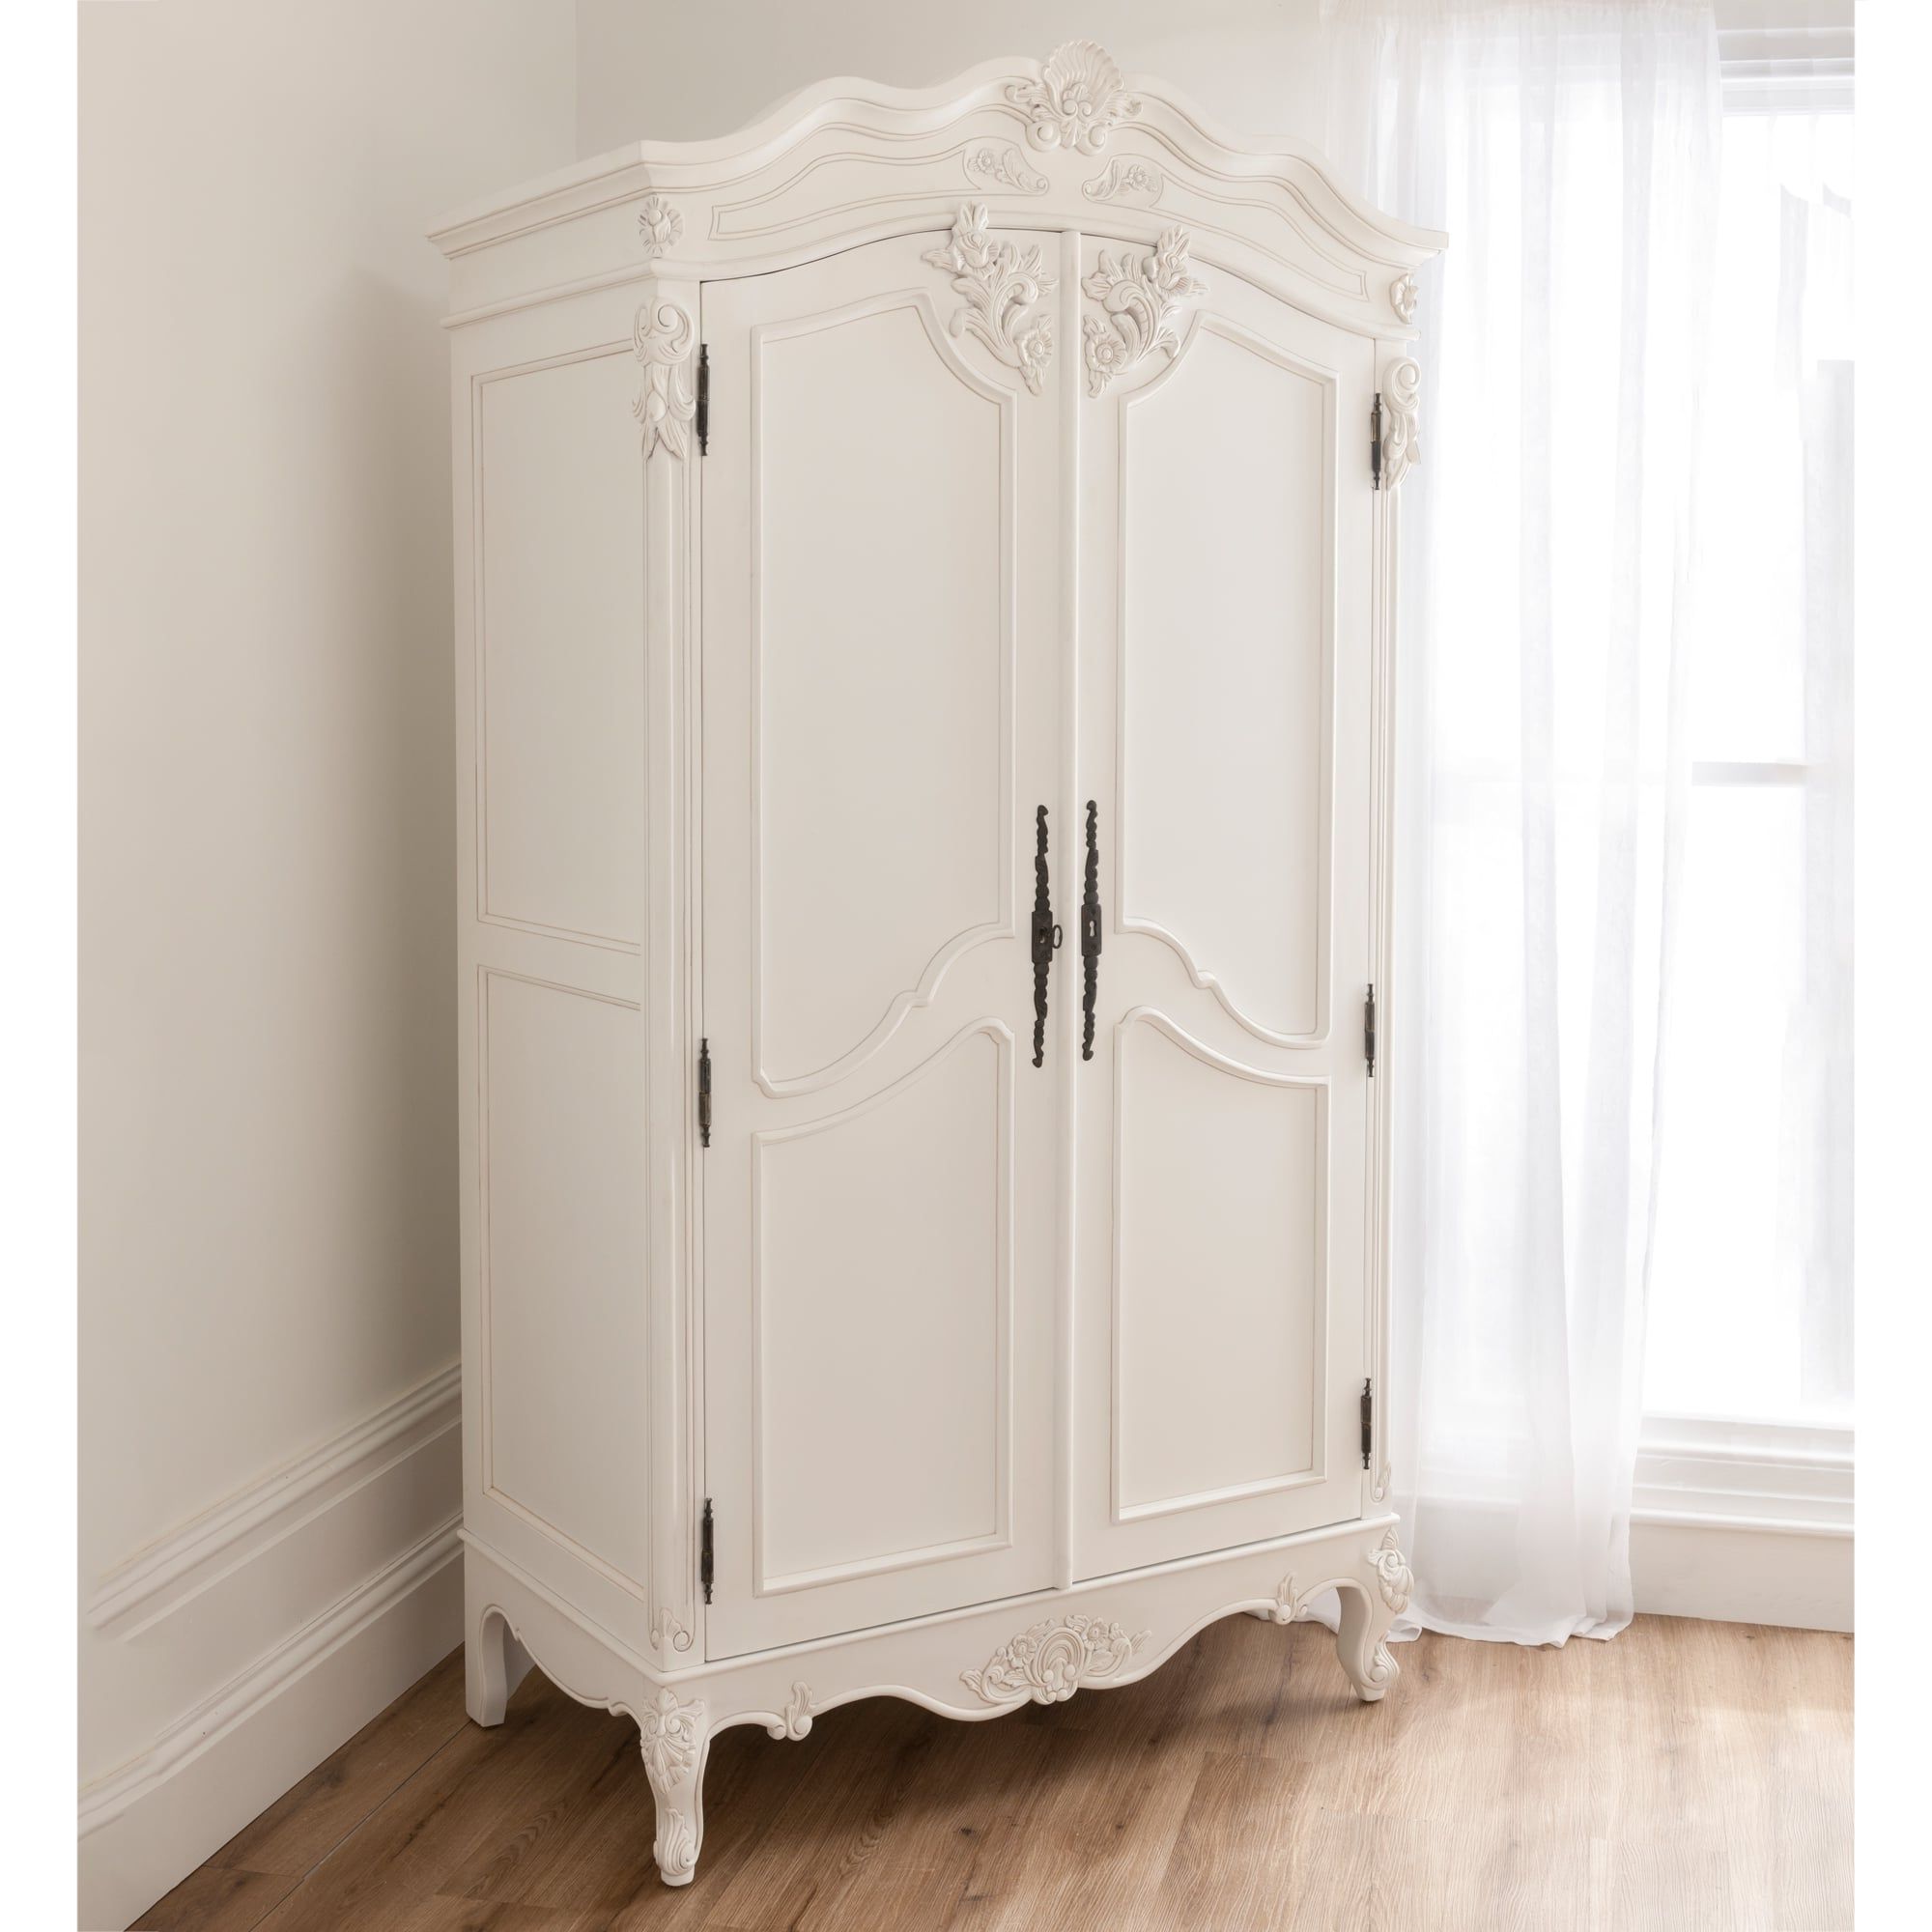 Baroque Antique French Wardrobe Is Available Online At Homesdirect365 Pertaining To Cheap French Style Wardrobes (View 2 of 20)